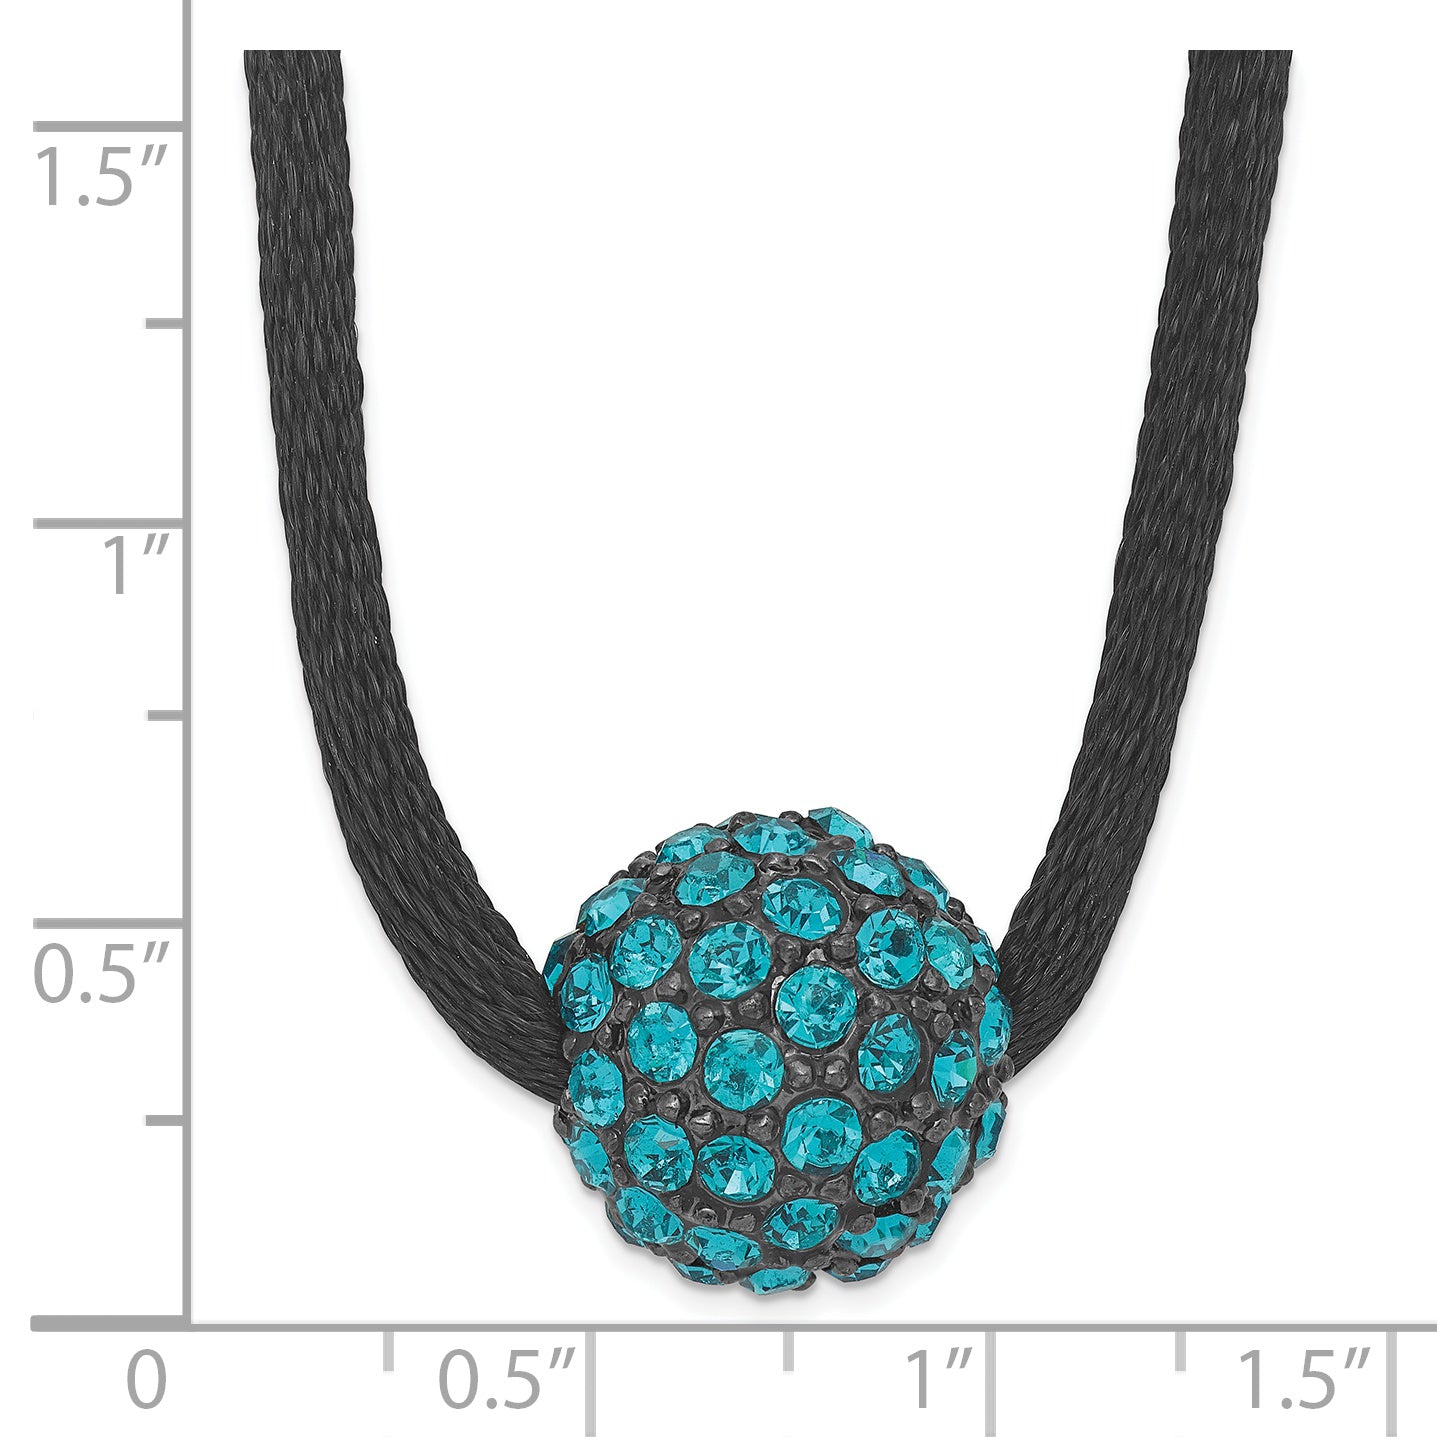 1928 Jewelry Black-plated Teal Glass Stones Fireball Adjustable 16 inch Satin Cord Necklace with 3 inch extension